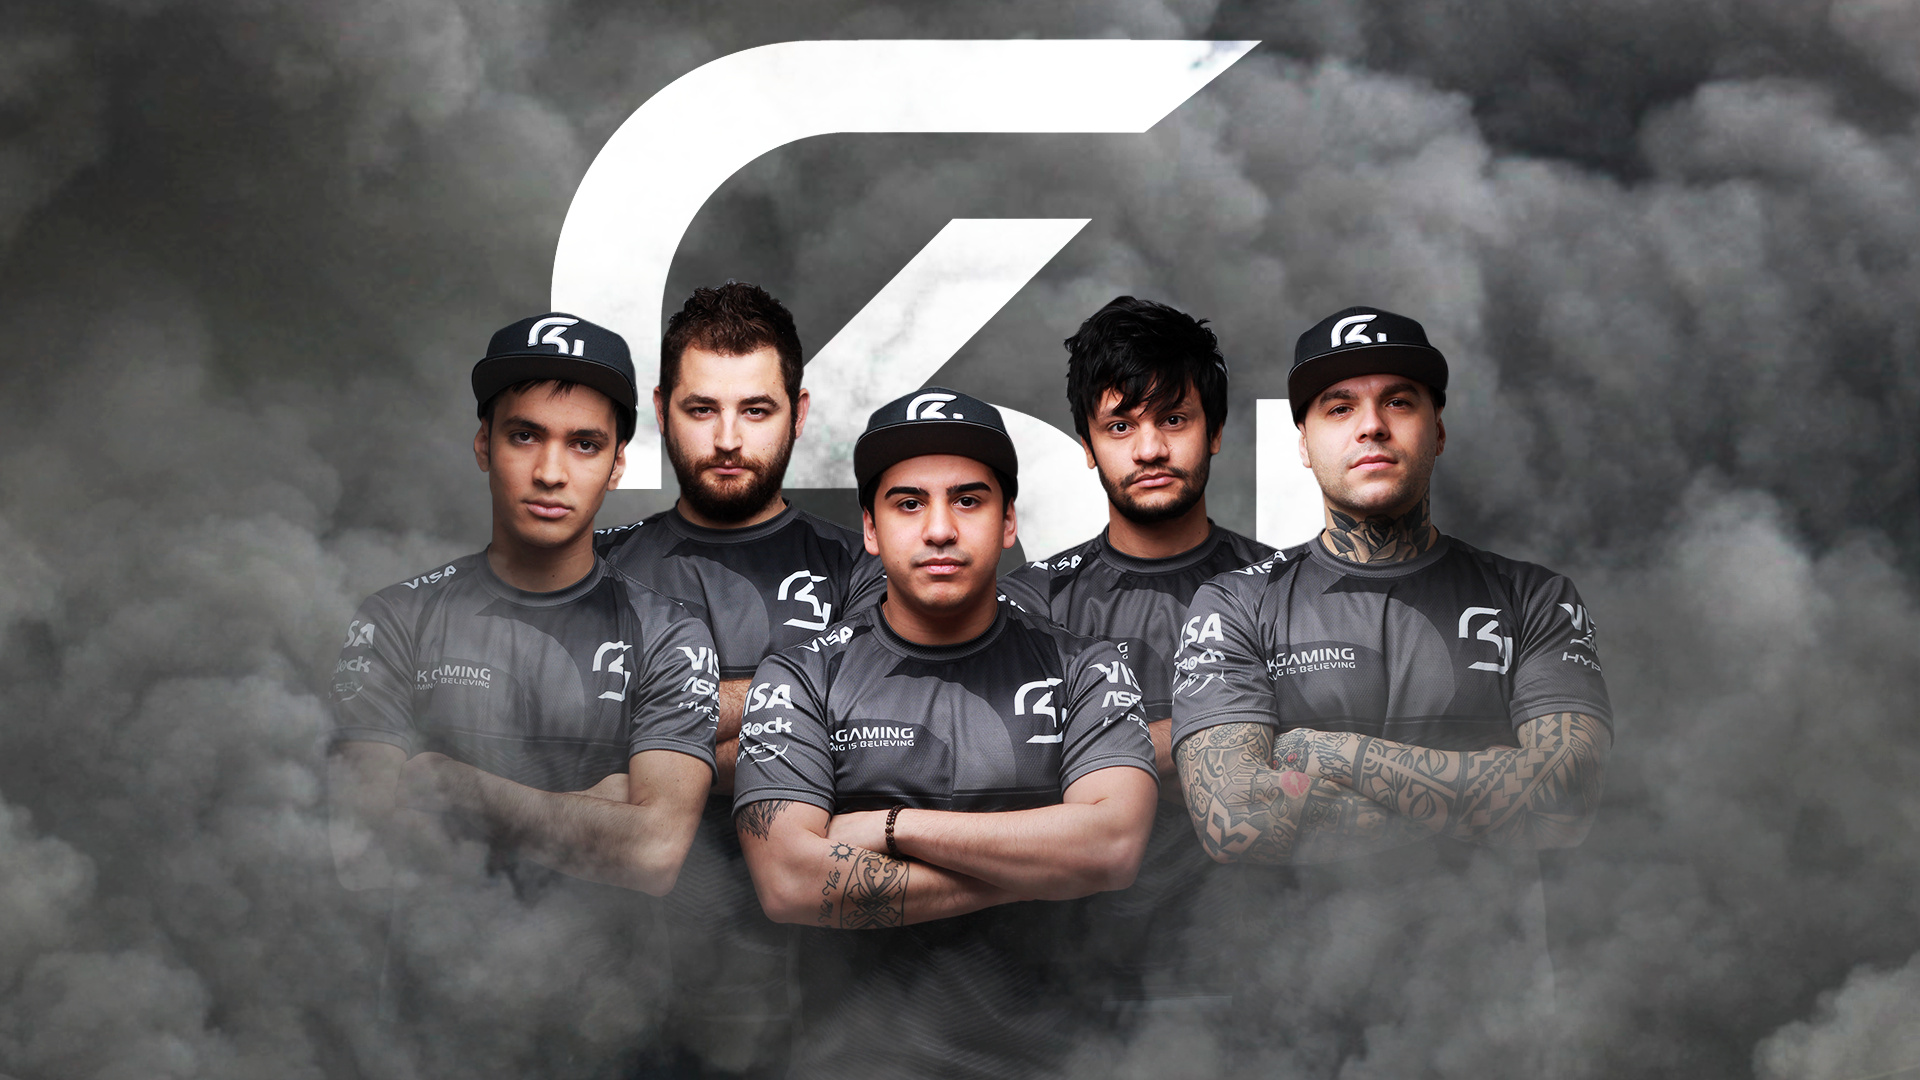 Esports: SK Gaming, Counter-Strike professional team, The ESL One Cologne 2016 Major champions. 1920x1080 Full HD Wallpaper.